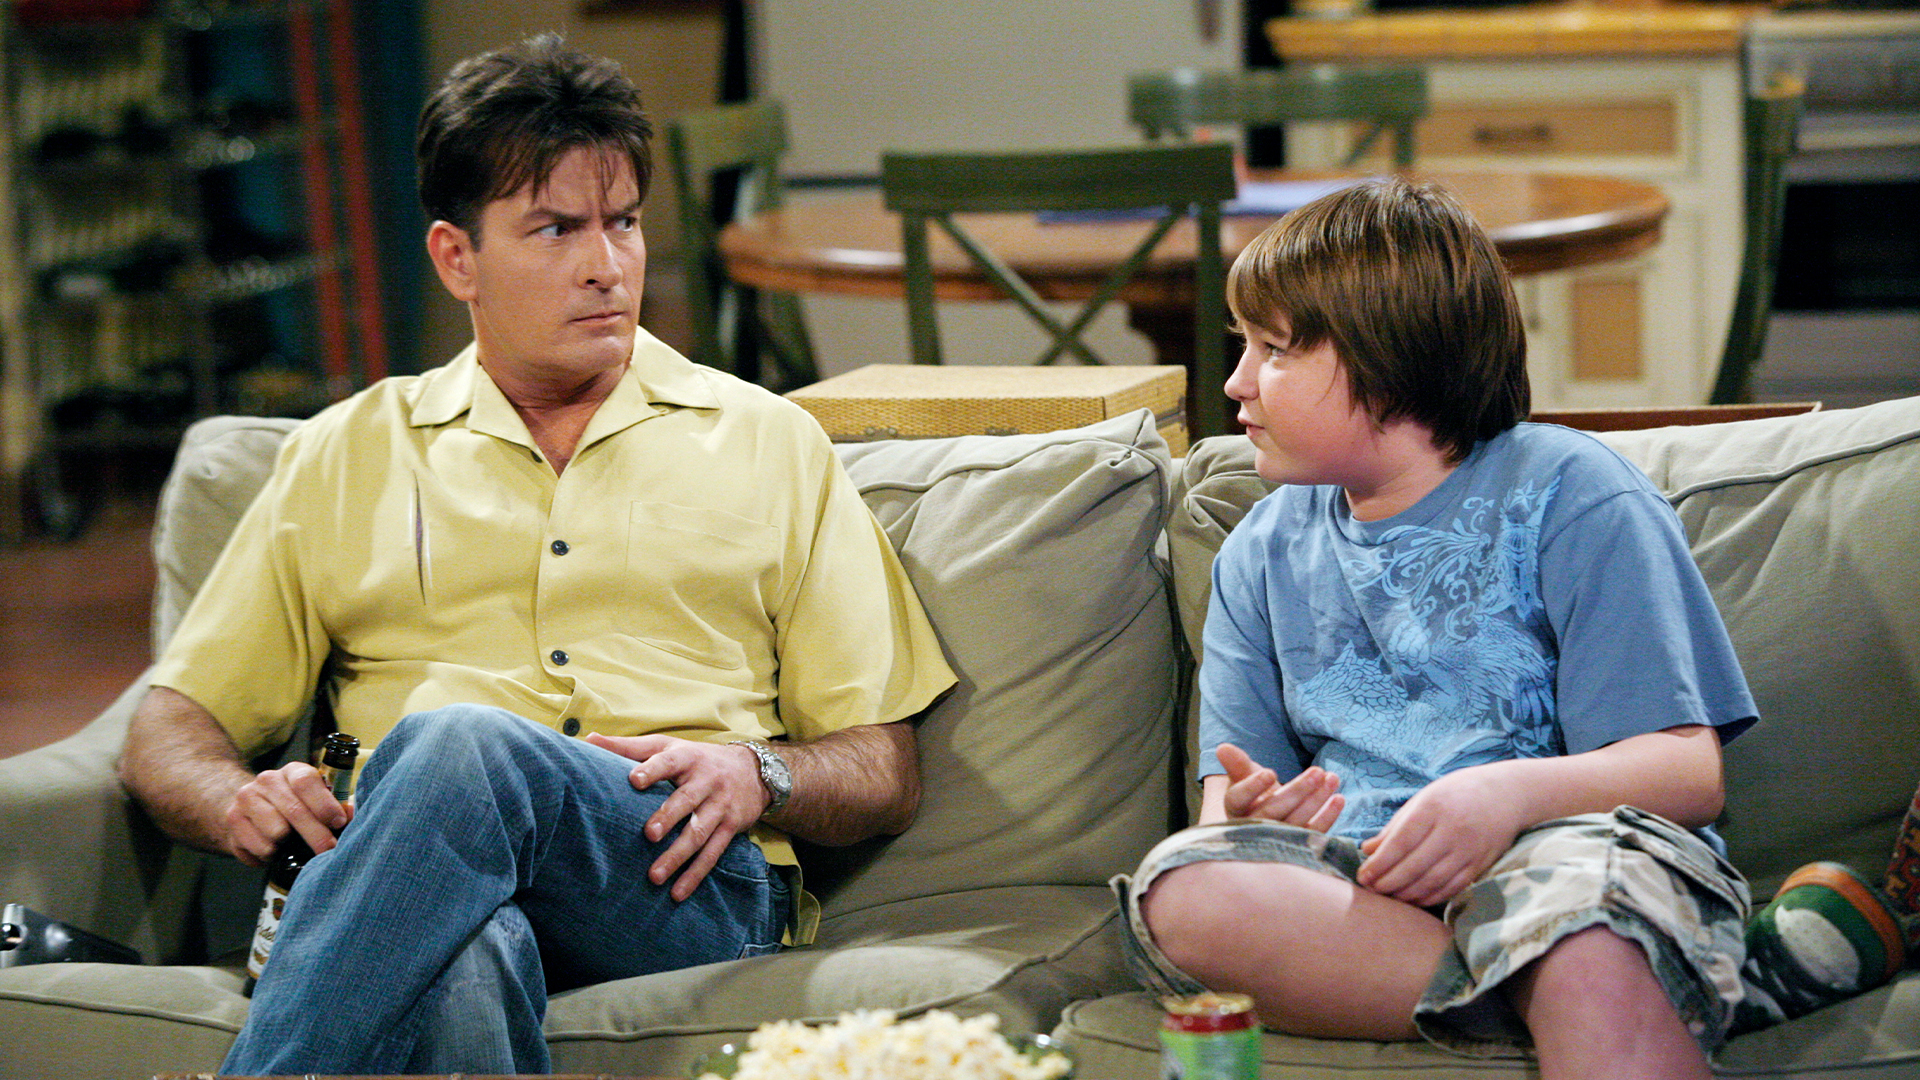 Two and a Half Men Season 5 Episode 11 - Meander to Your Dander